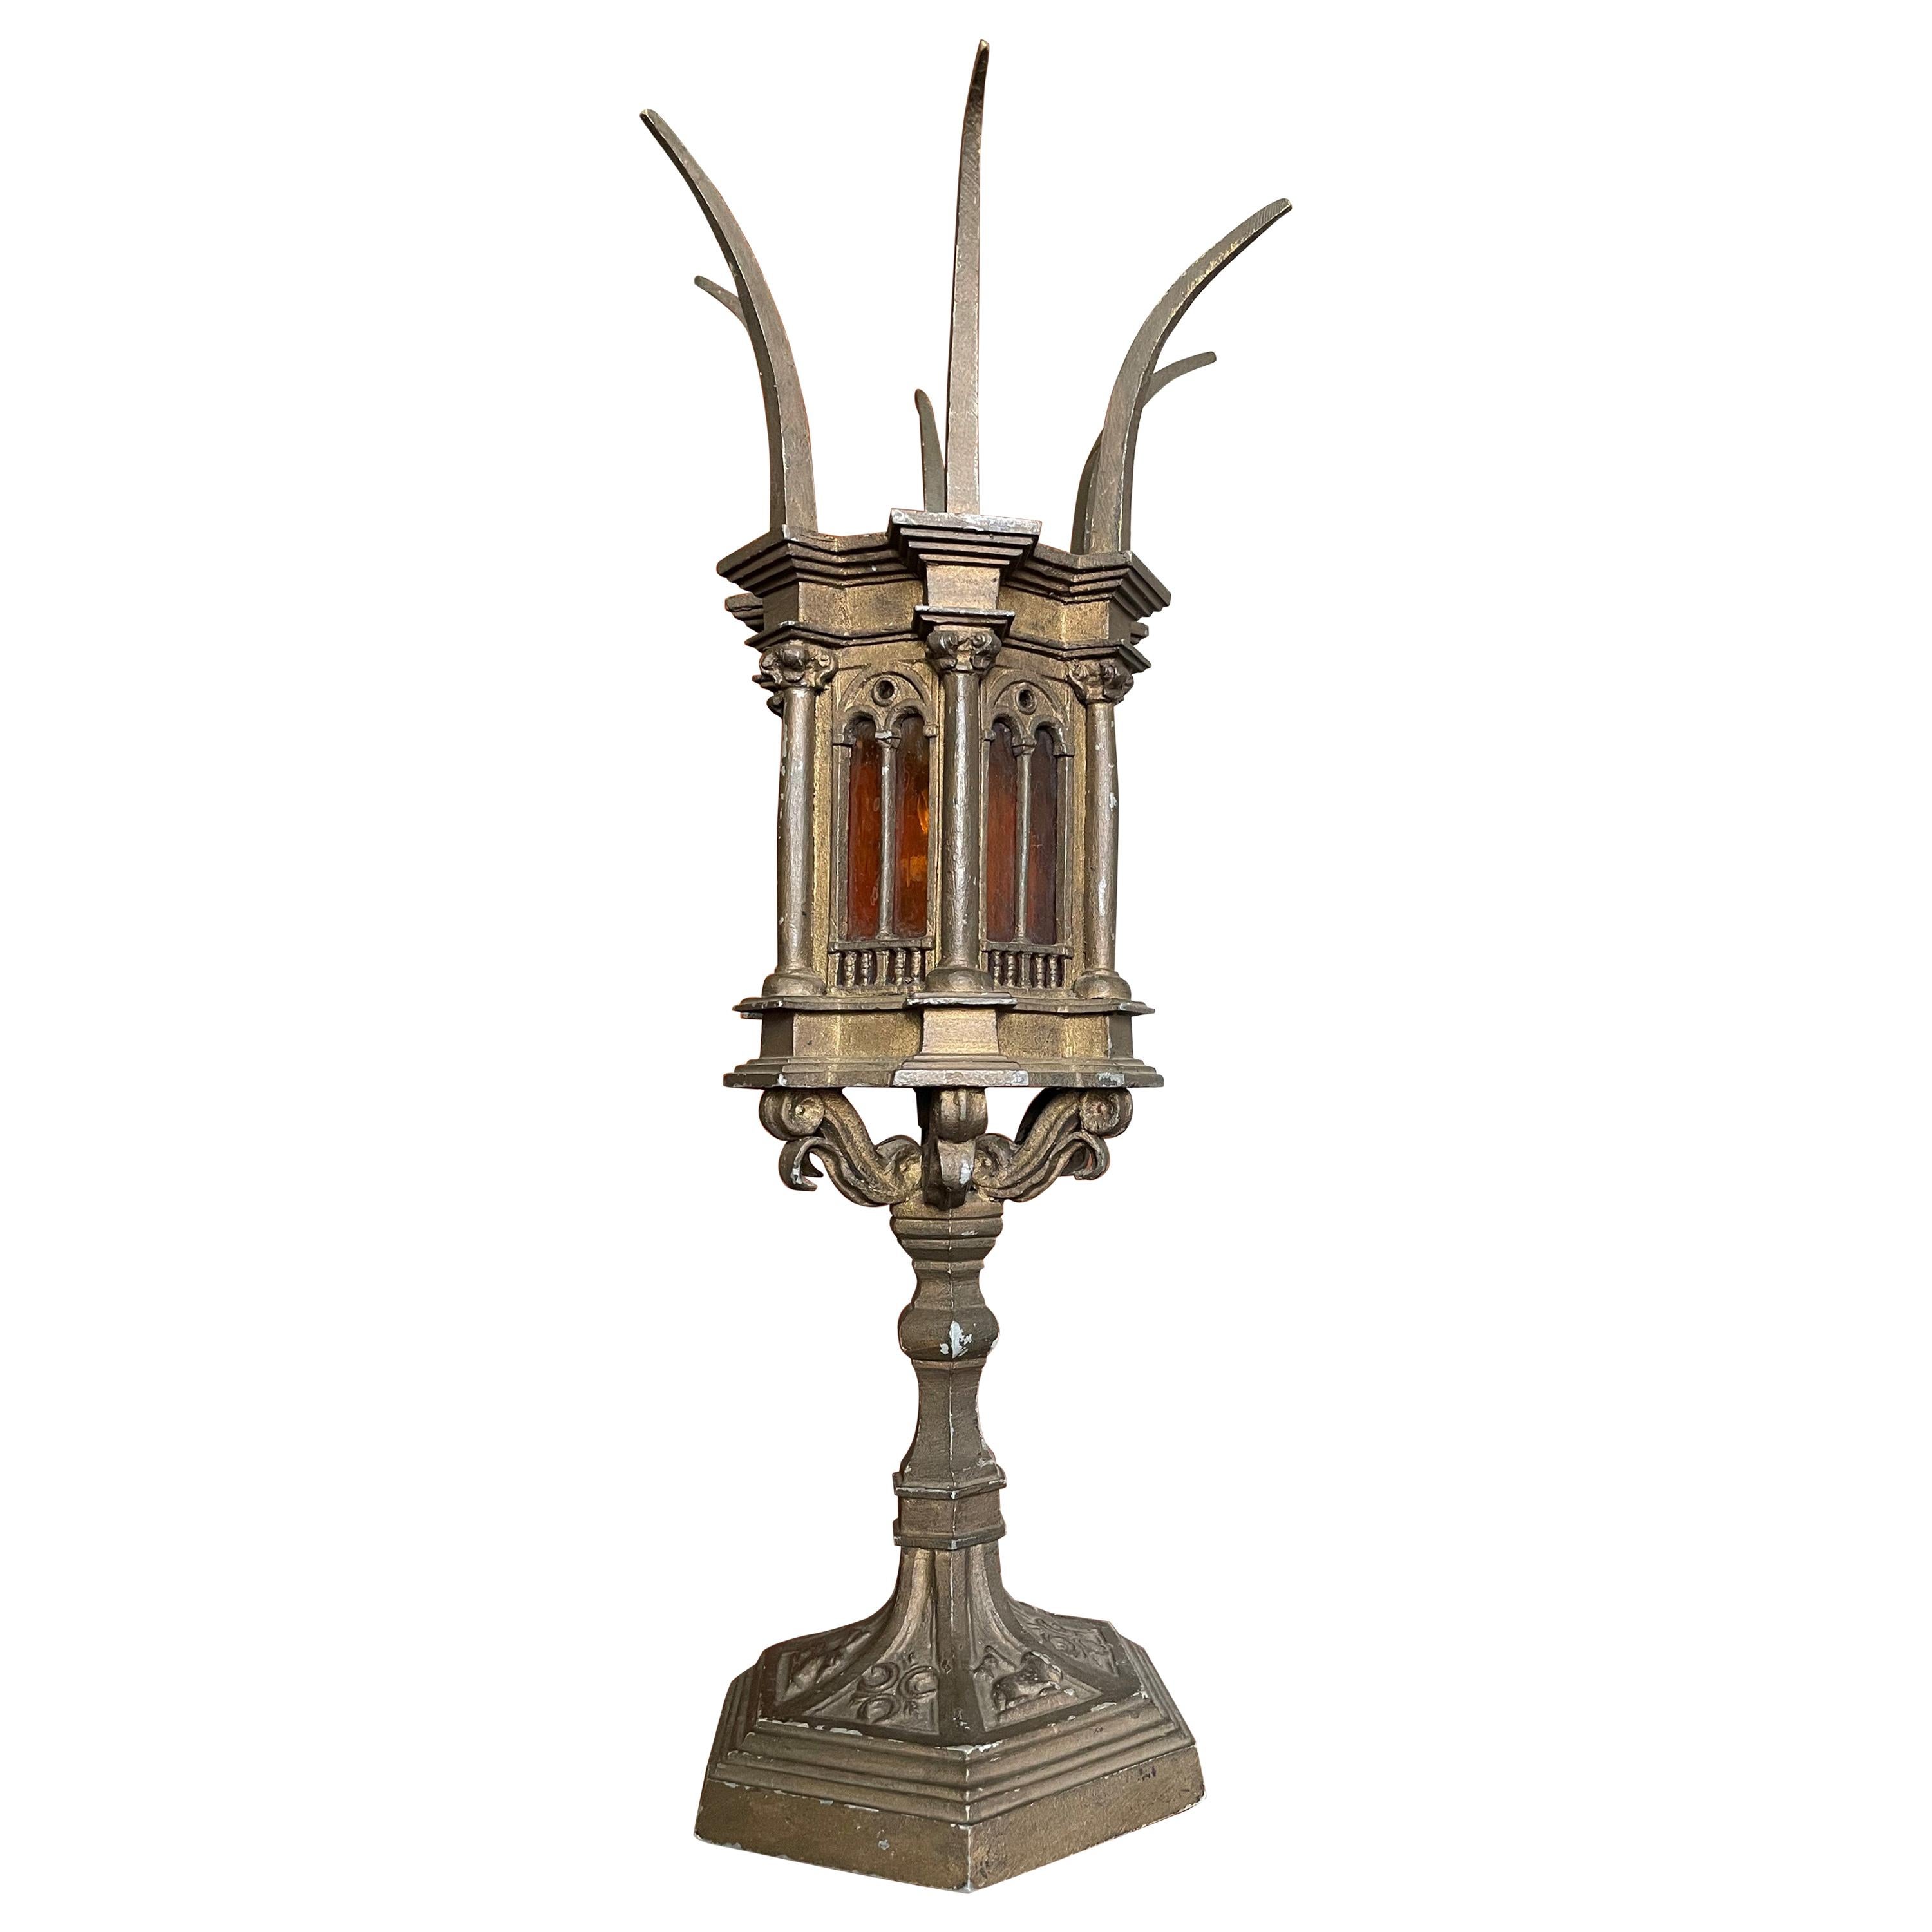 Unique Early 1900s Gothic Revival Table Lamp with Cathedral Glass Church Windows